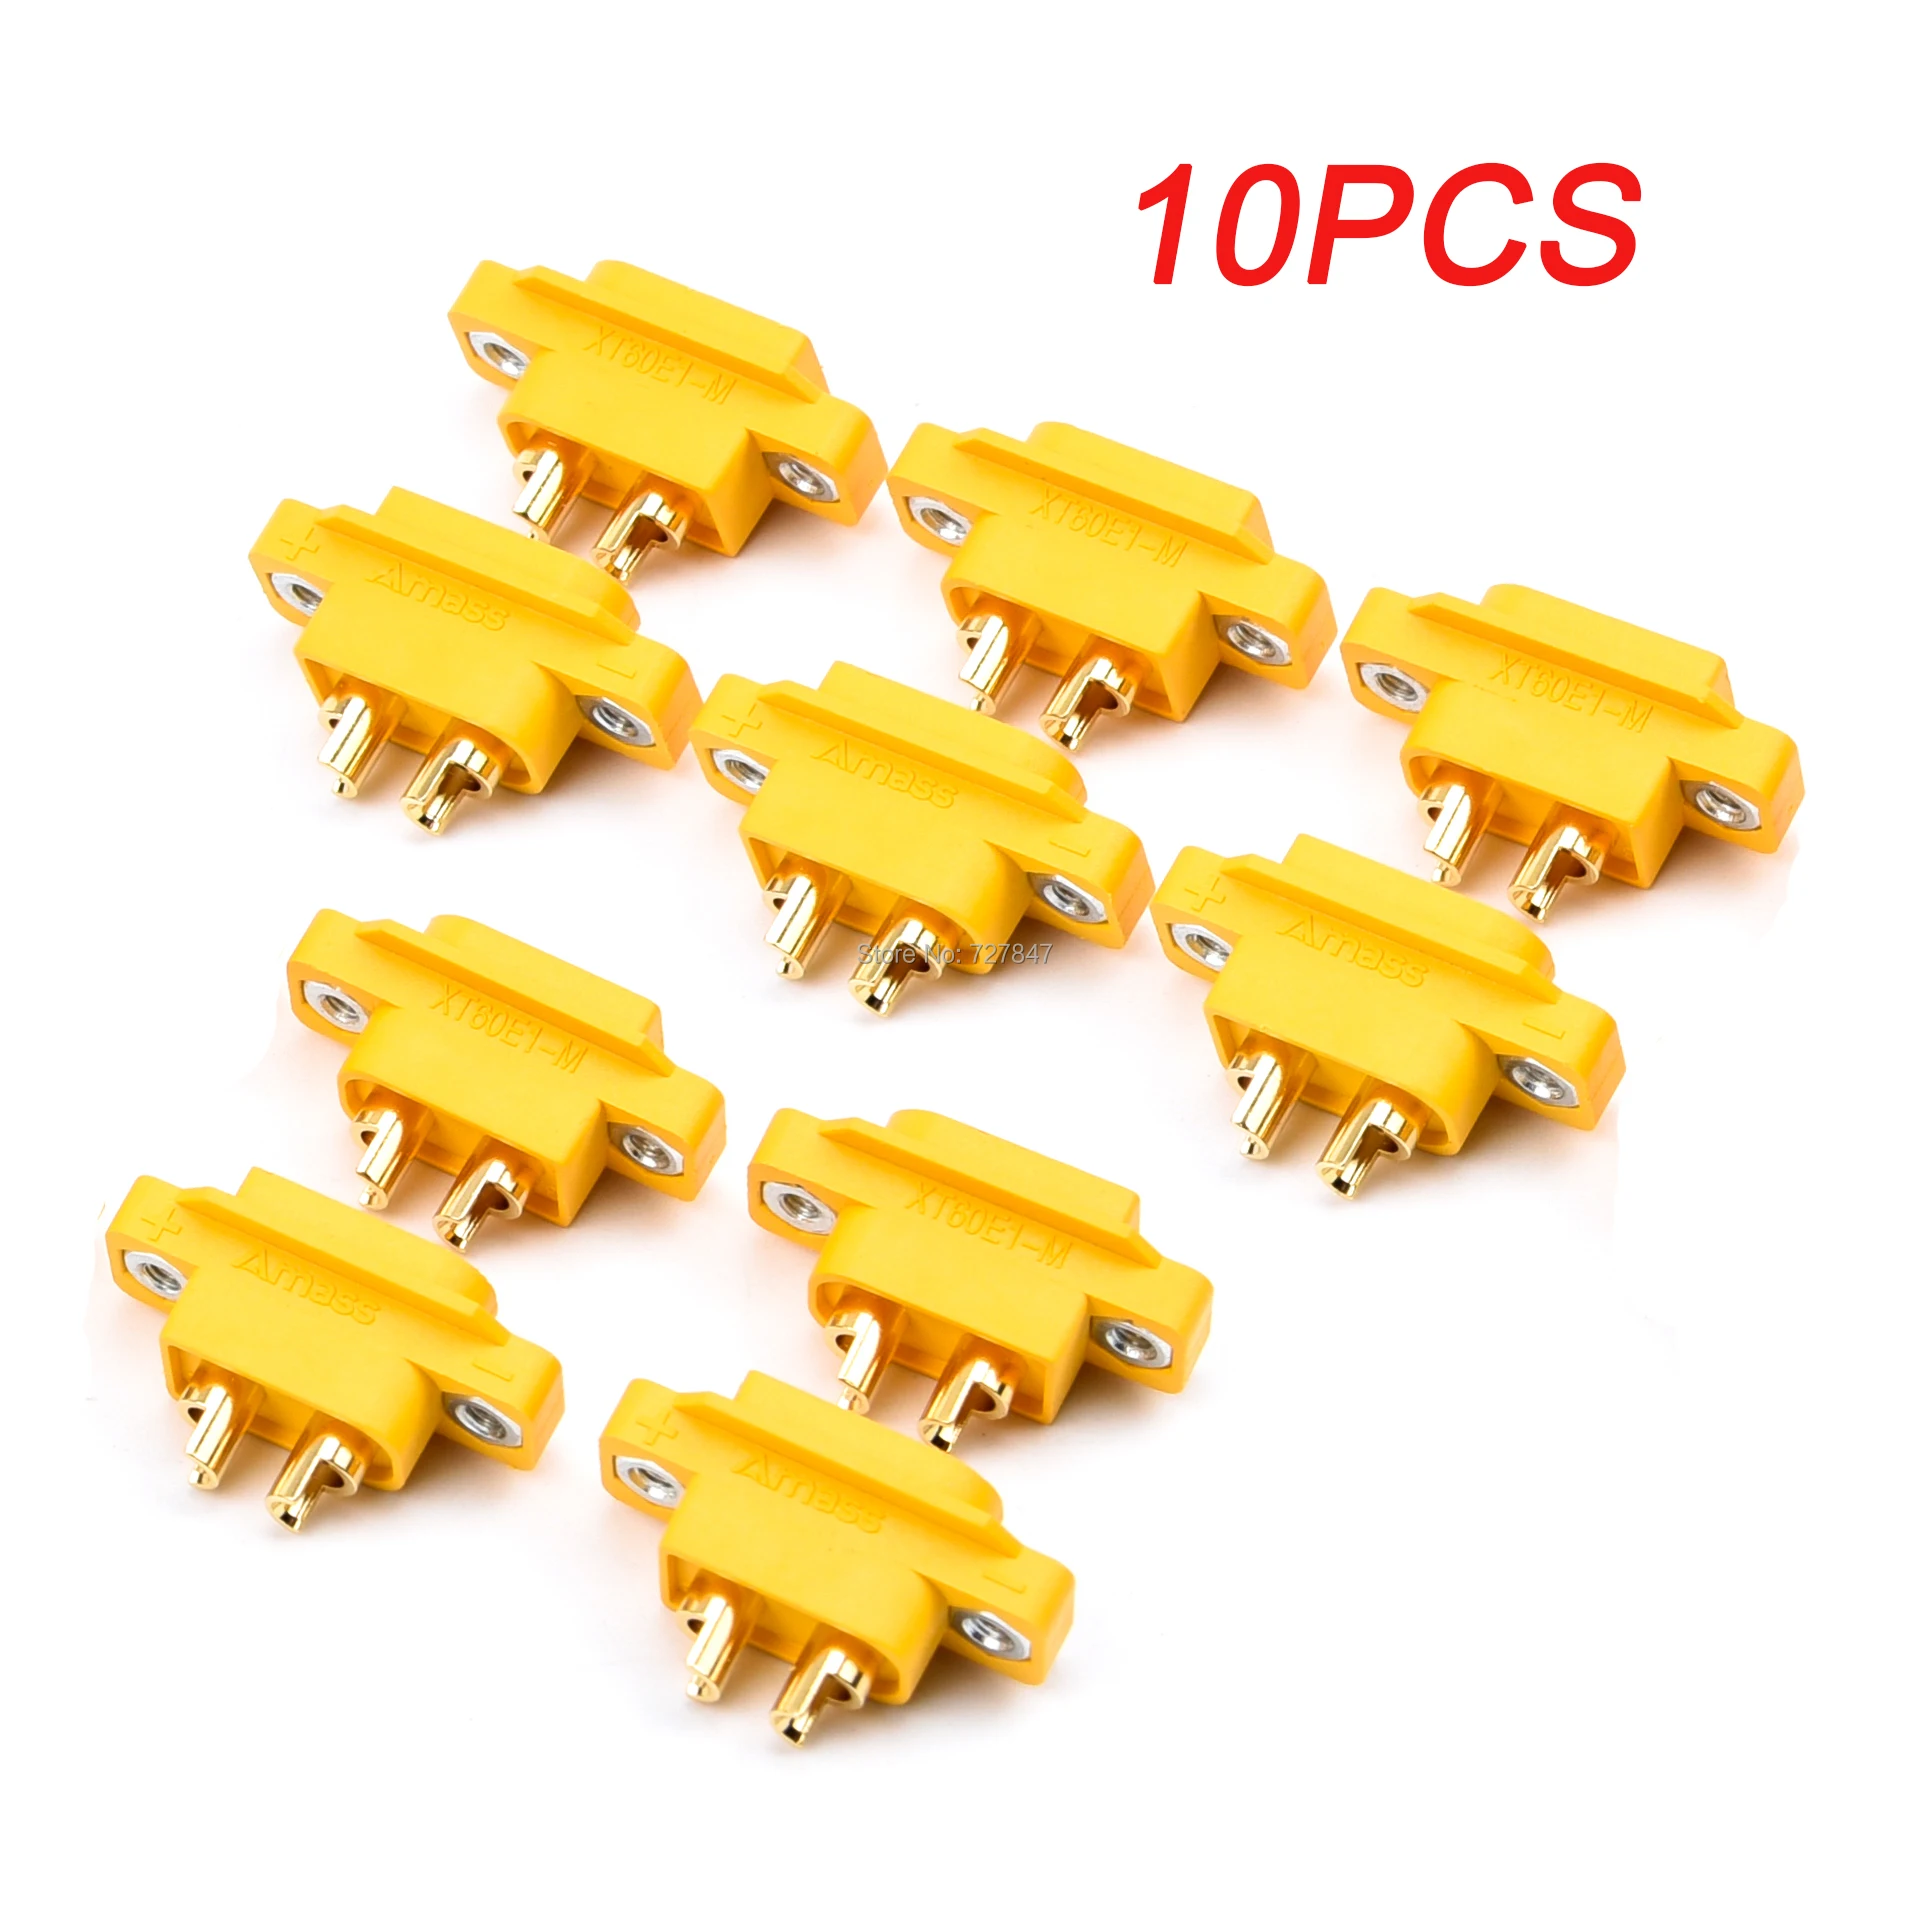 Amass 10 Pcs XT60E1-M Mountable XT60 Male Plug Connector with Screw for RC  Models Multicopter … …